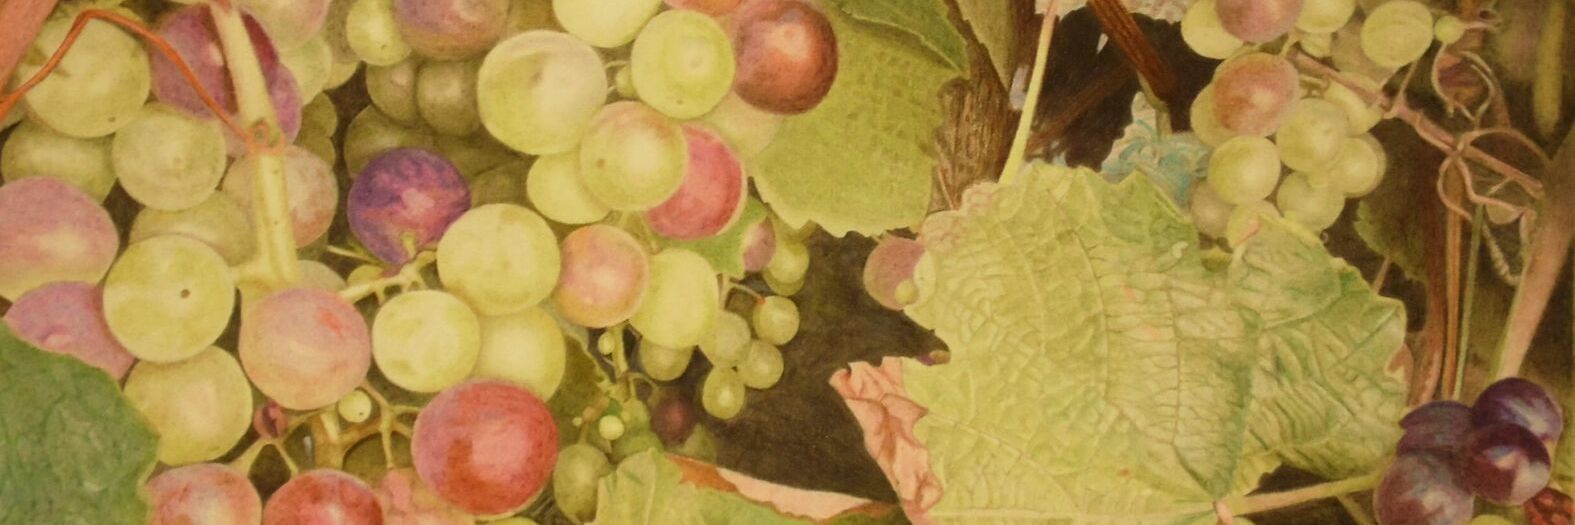 drawing of grapes and leaves